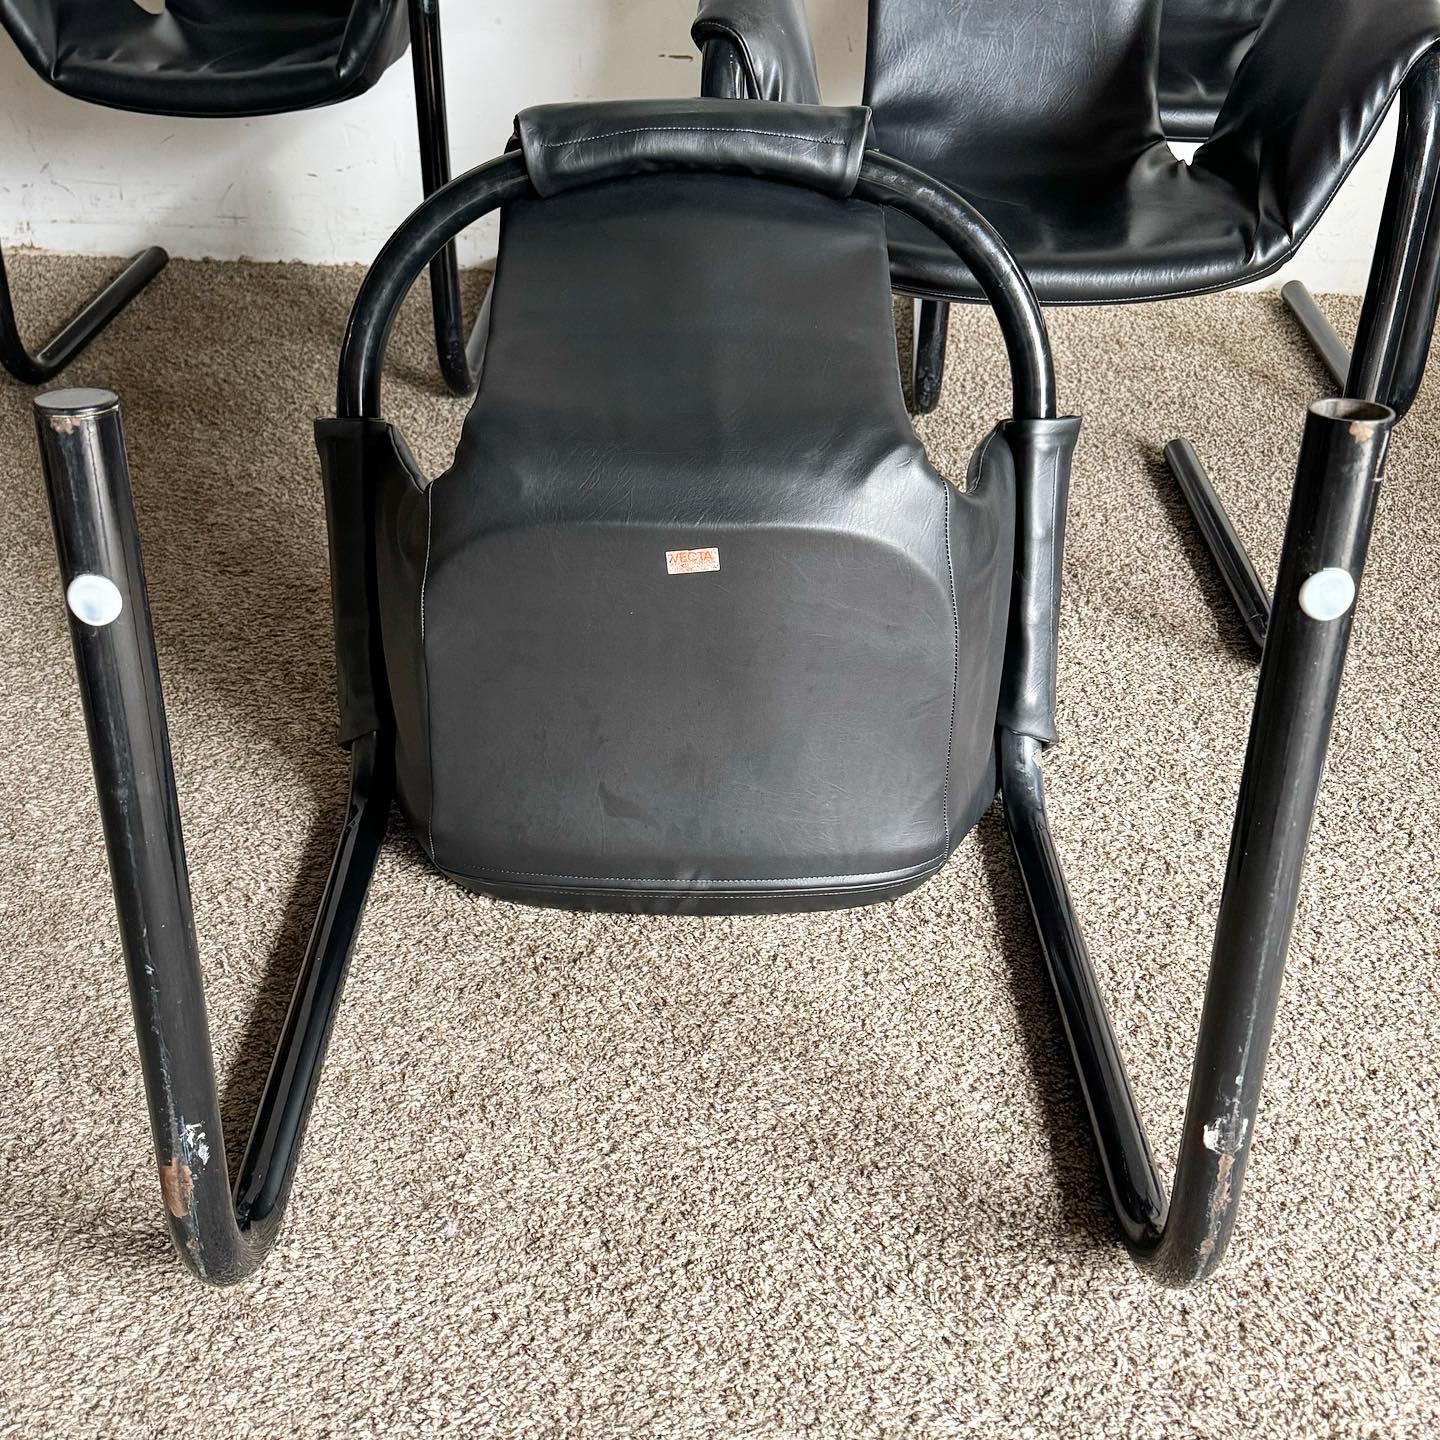 Embrace the retro flair of the 1970s with the Black Vinyl in Black Metal Zermatt Tubular Sling Chairs by Vecta. These iconic chairs feature a minimalist design with a black vinyl sling and tubular metal frame, perfect for adding a chic,